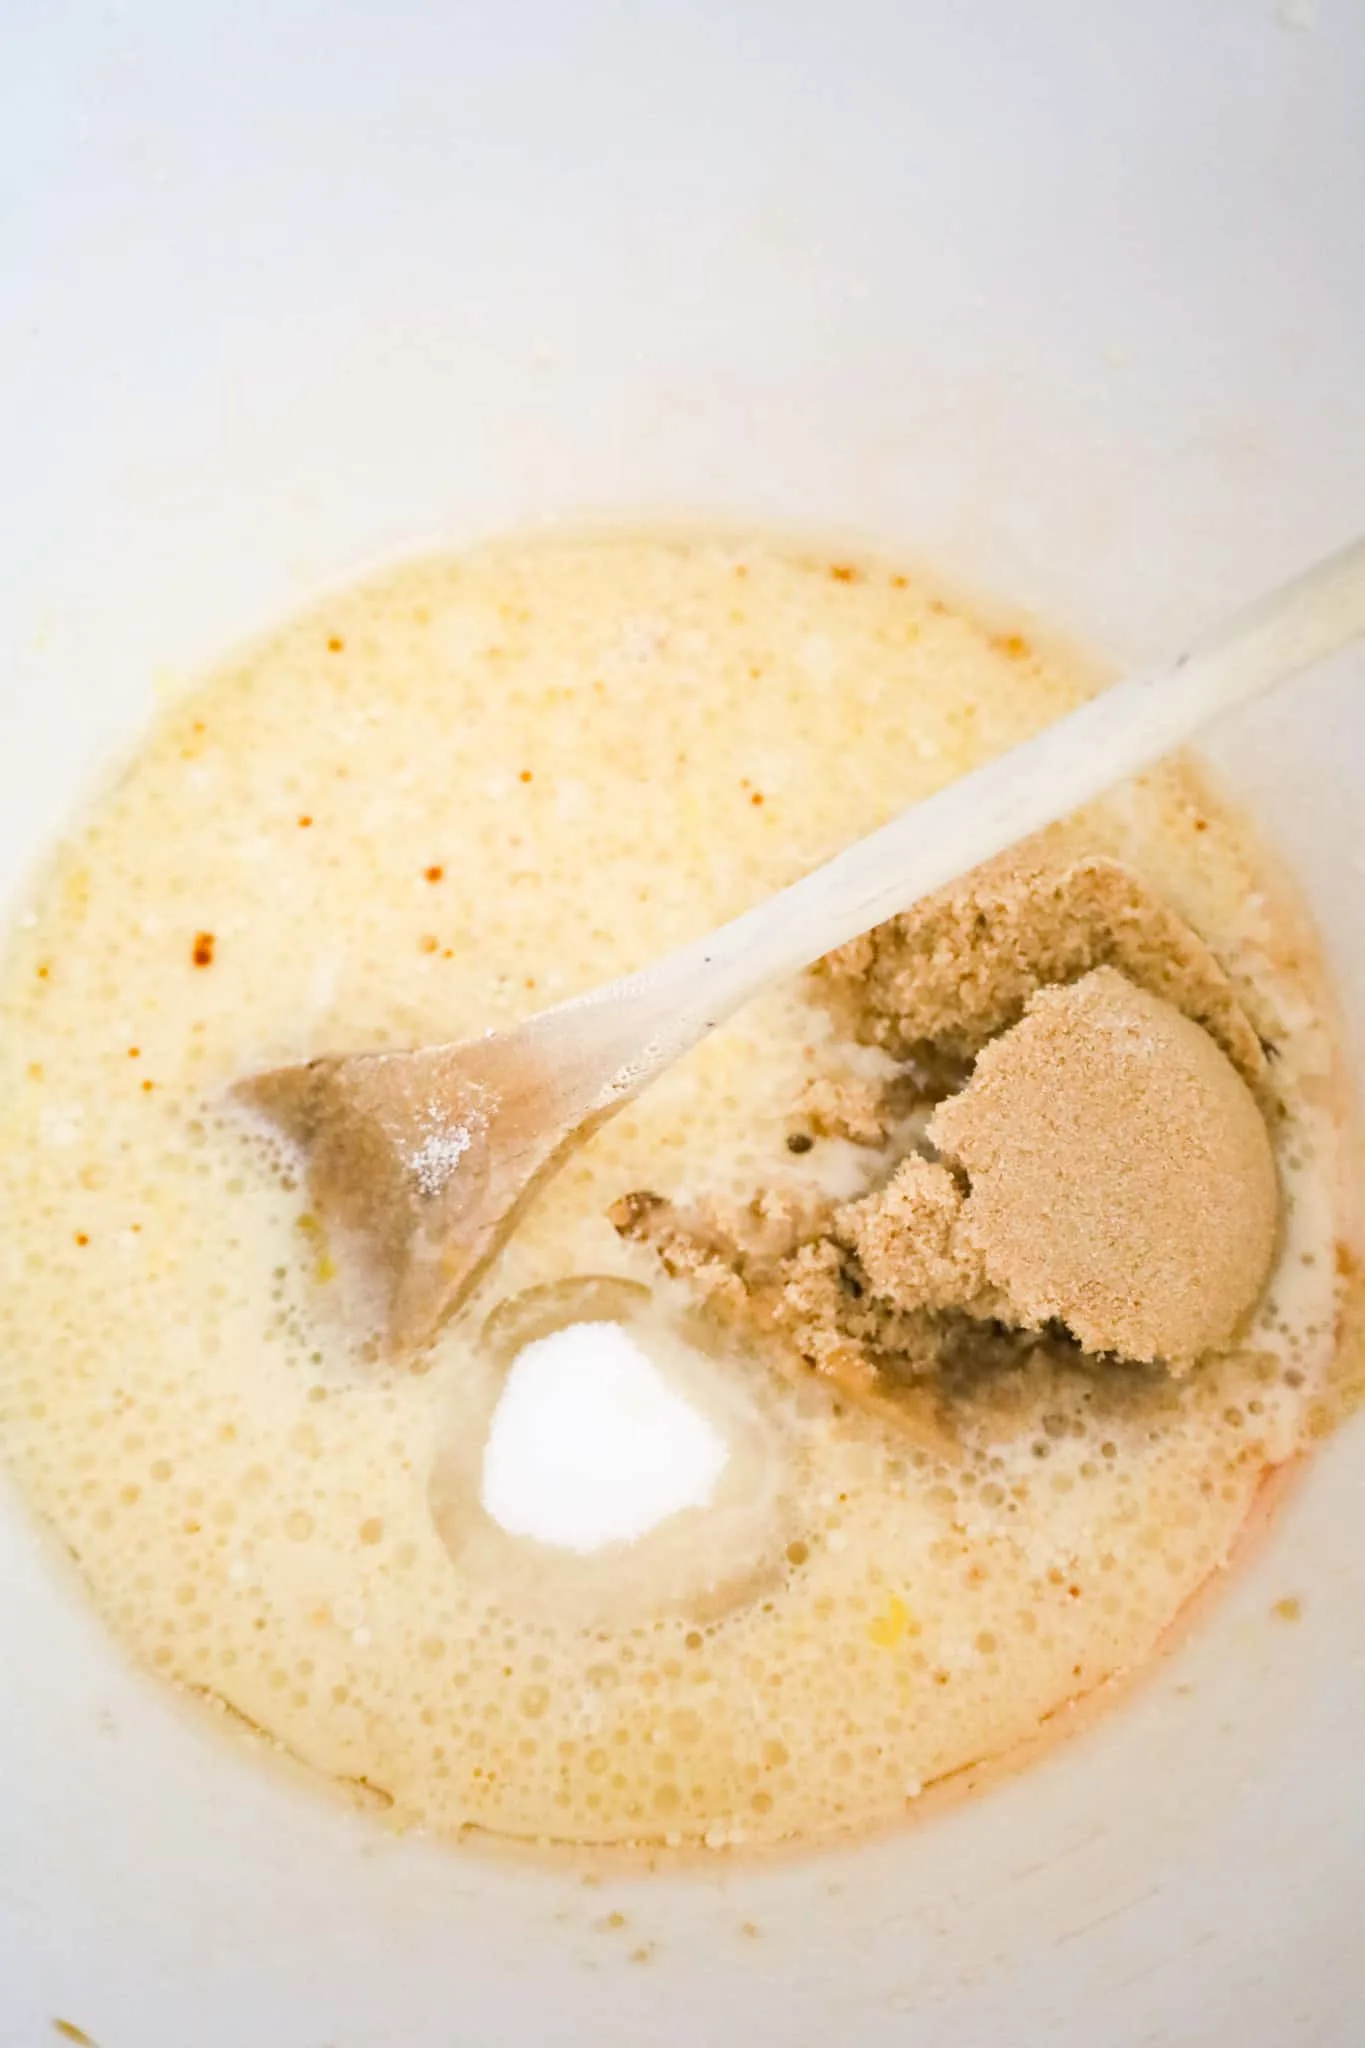 brown sugar and granulated sugar added to milk and oil mixture in a mixing bowl